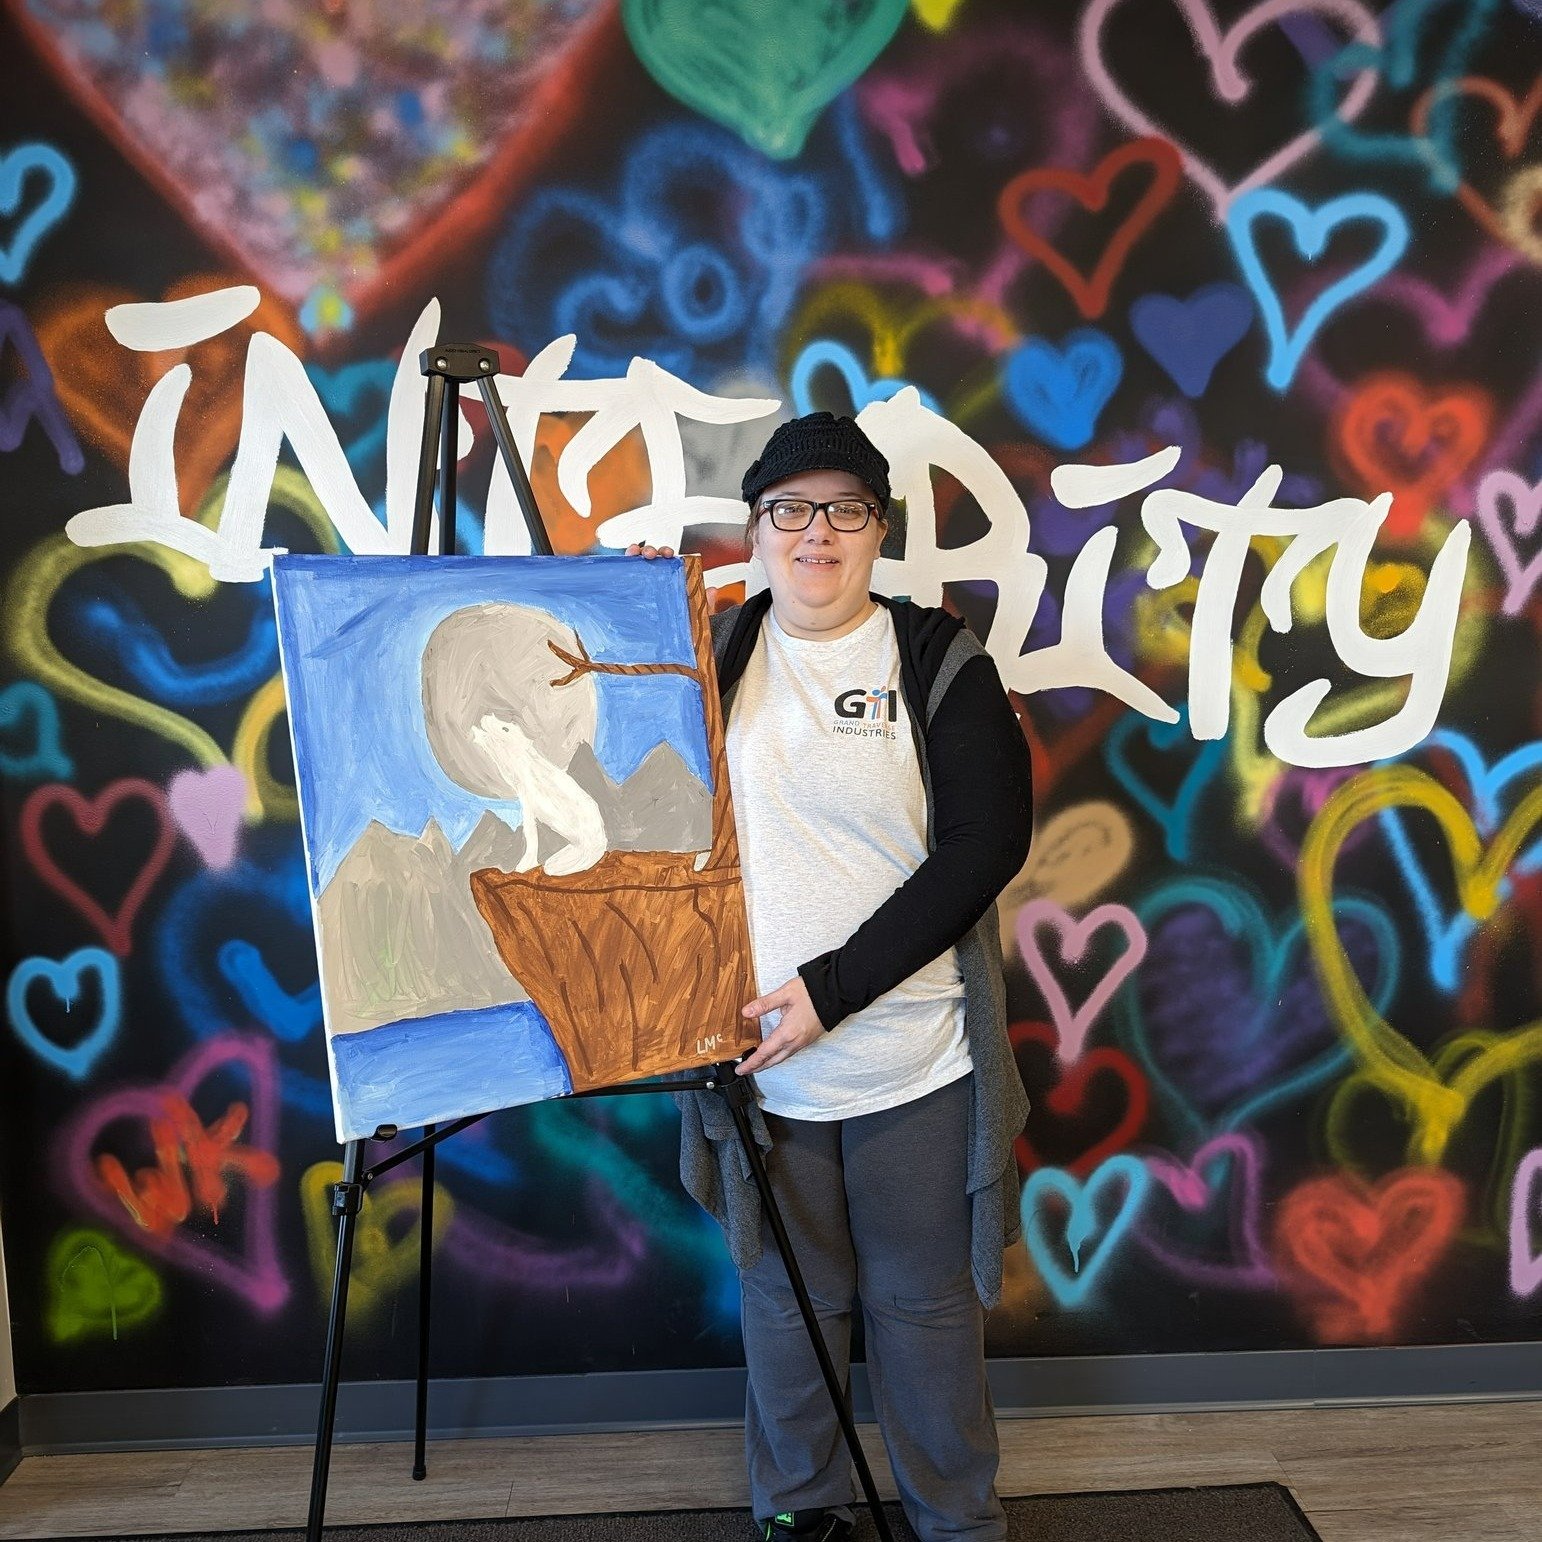 Linda is excited to enter her piece entitled &quot;Calling for Friends&quot; into the upcoming Breaking Barriers Art Exhibit Contest sponsored by the Michigan Developmental Disabilities Council. Selected artworks will be displayed in a public art exh